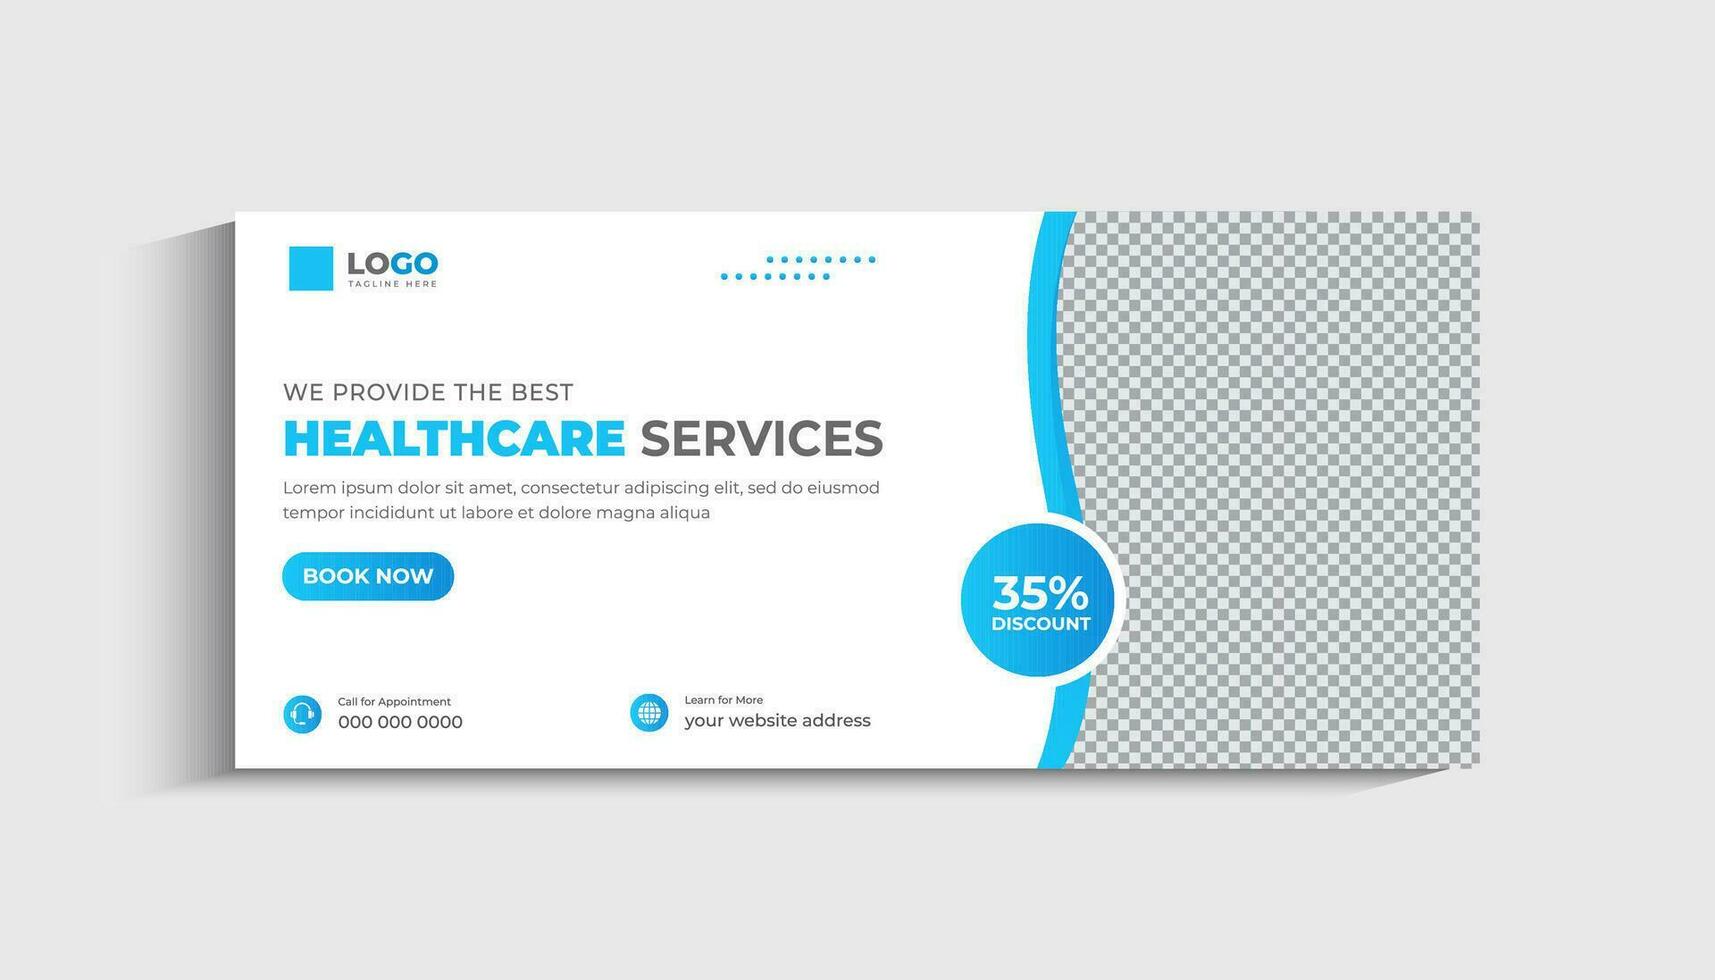 Medical and Healthcare social media Cover and Web Banner template vector